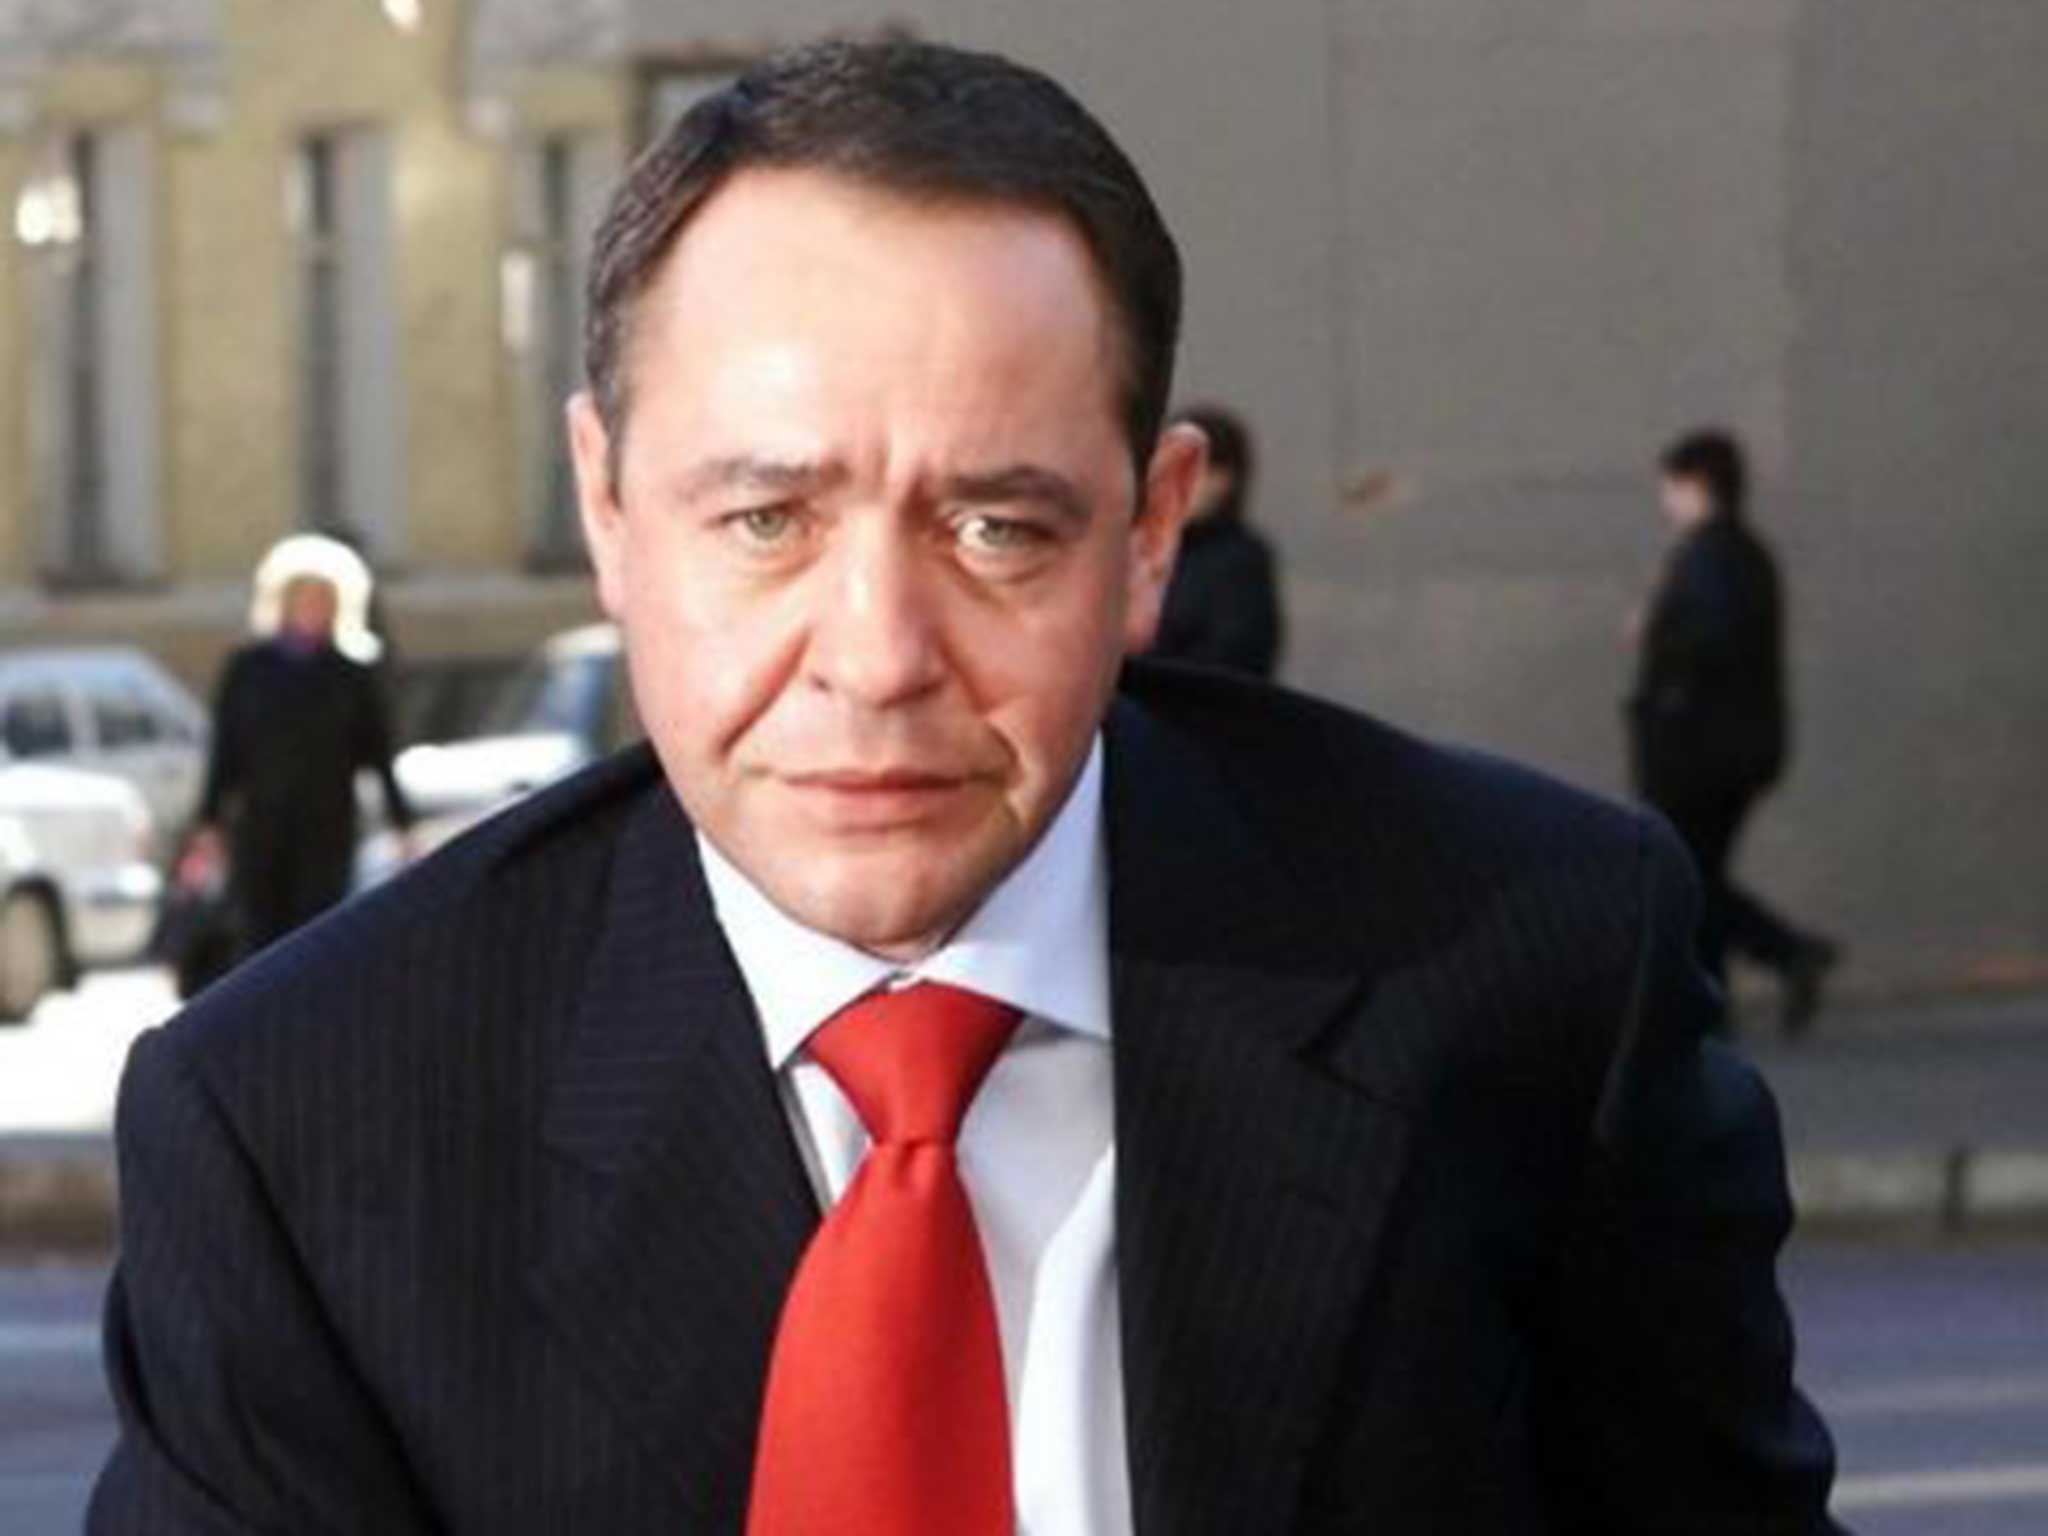 Mikhail Lesin was a prominent Putin supporter